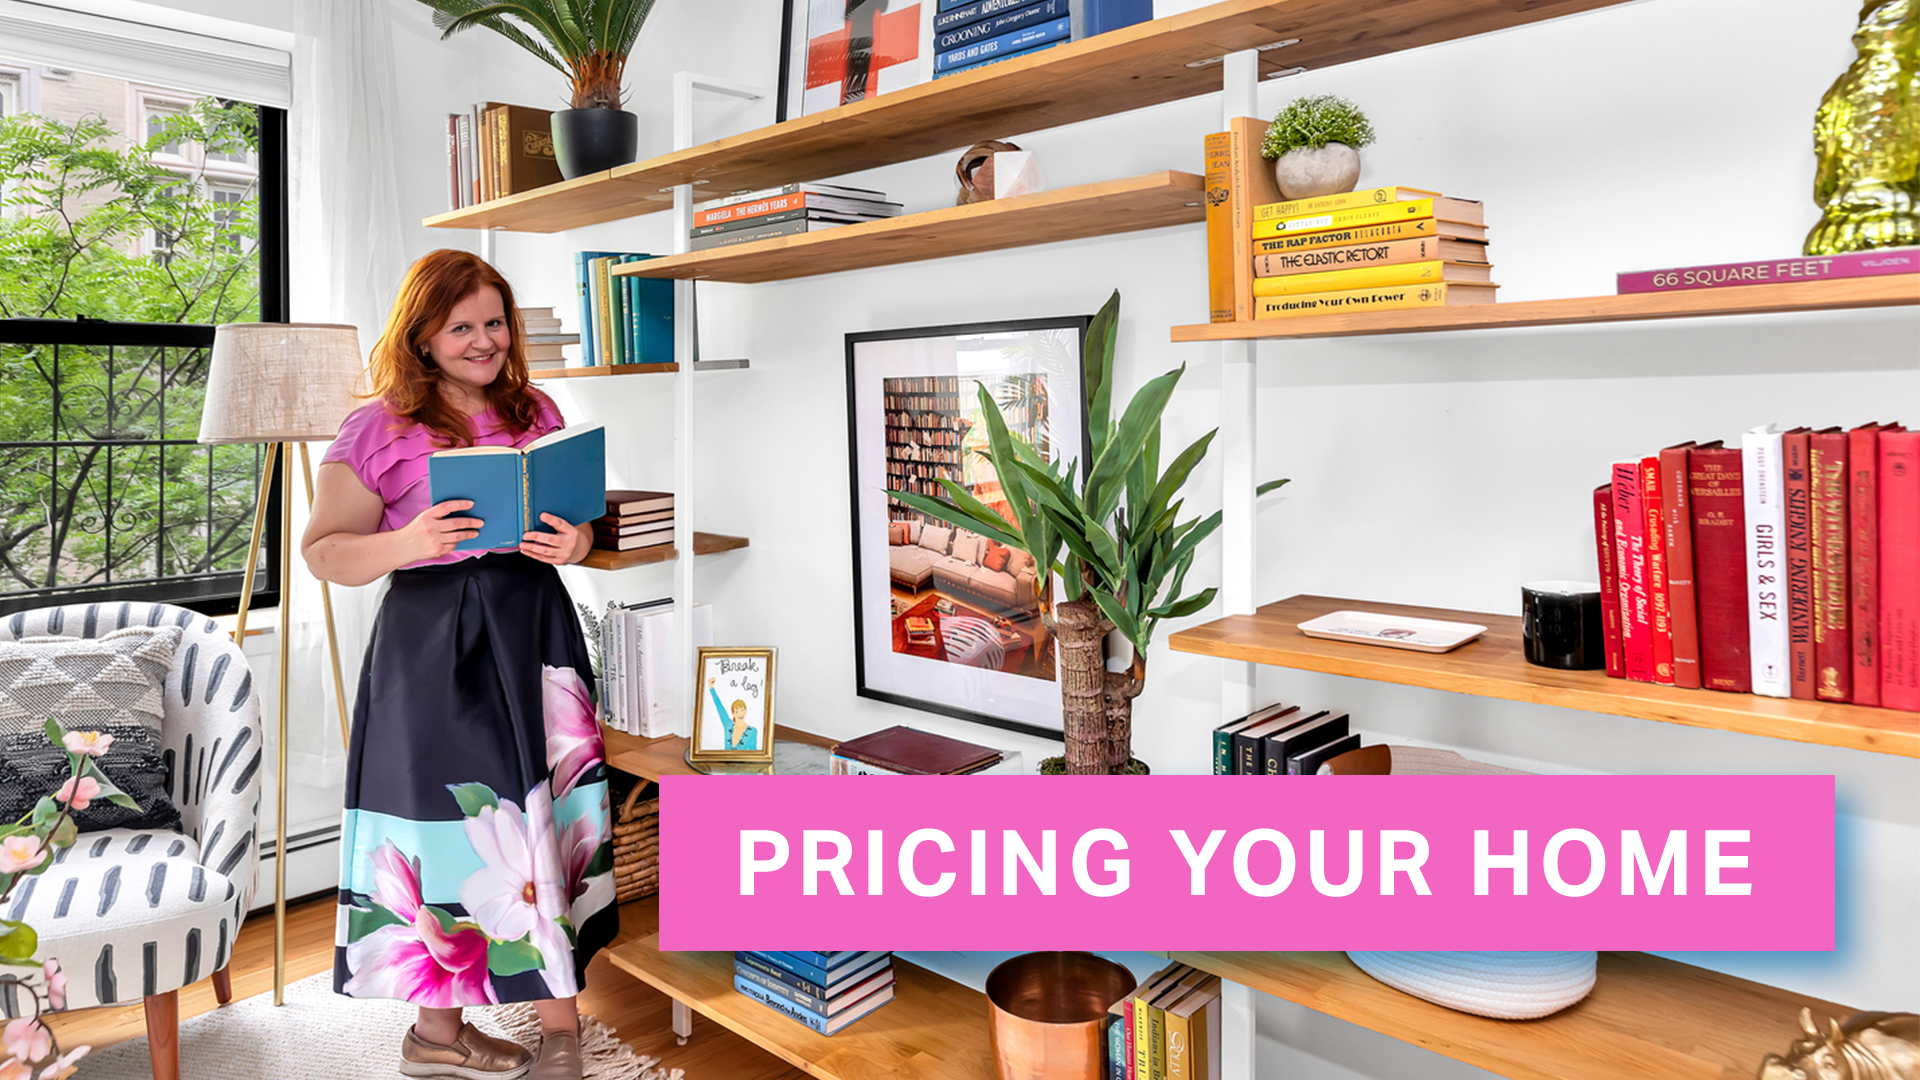 A Change of A Dress - Pricing Your Home Horizontal Thumbnail (4)